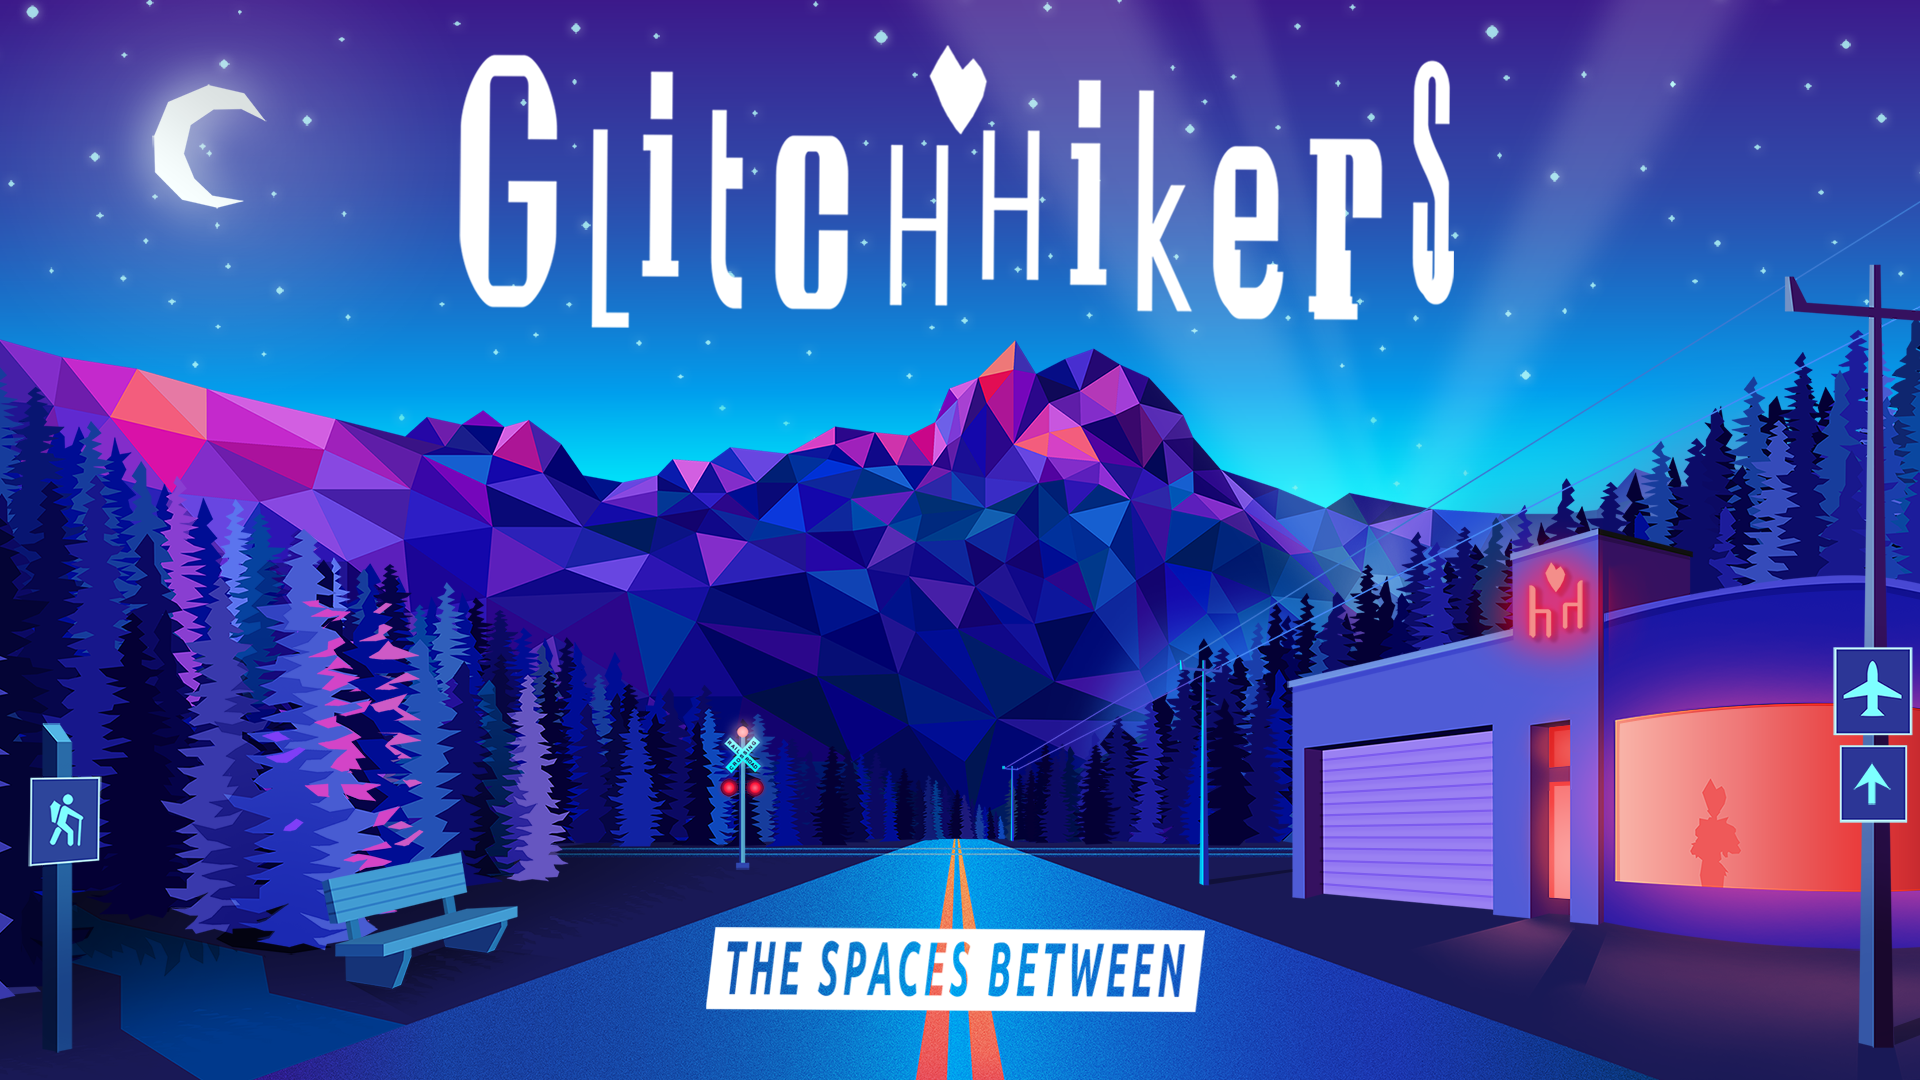 Image for Glitchhikers: The Spaces Between offers ‘a space to reflect on the state of the world and on yourself’